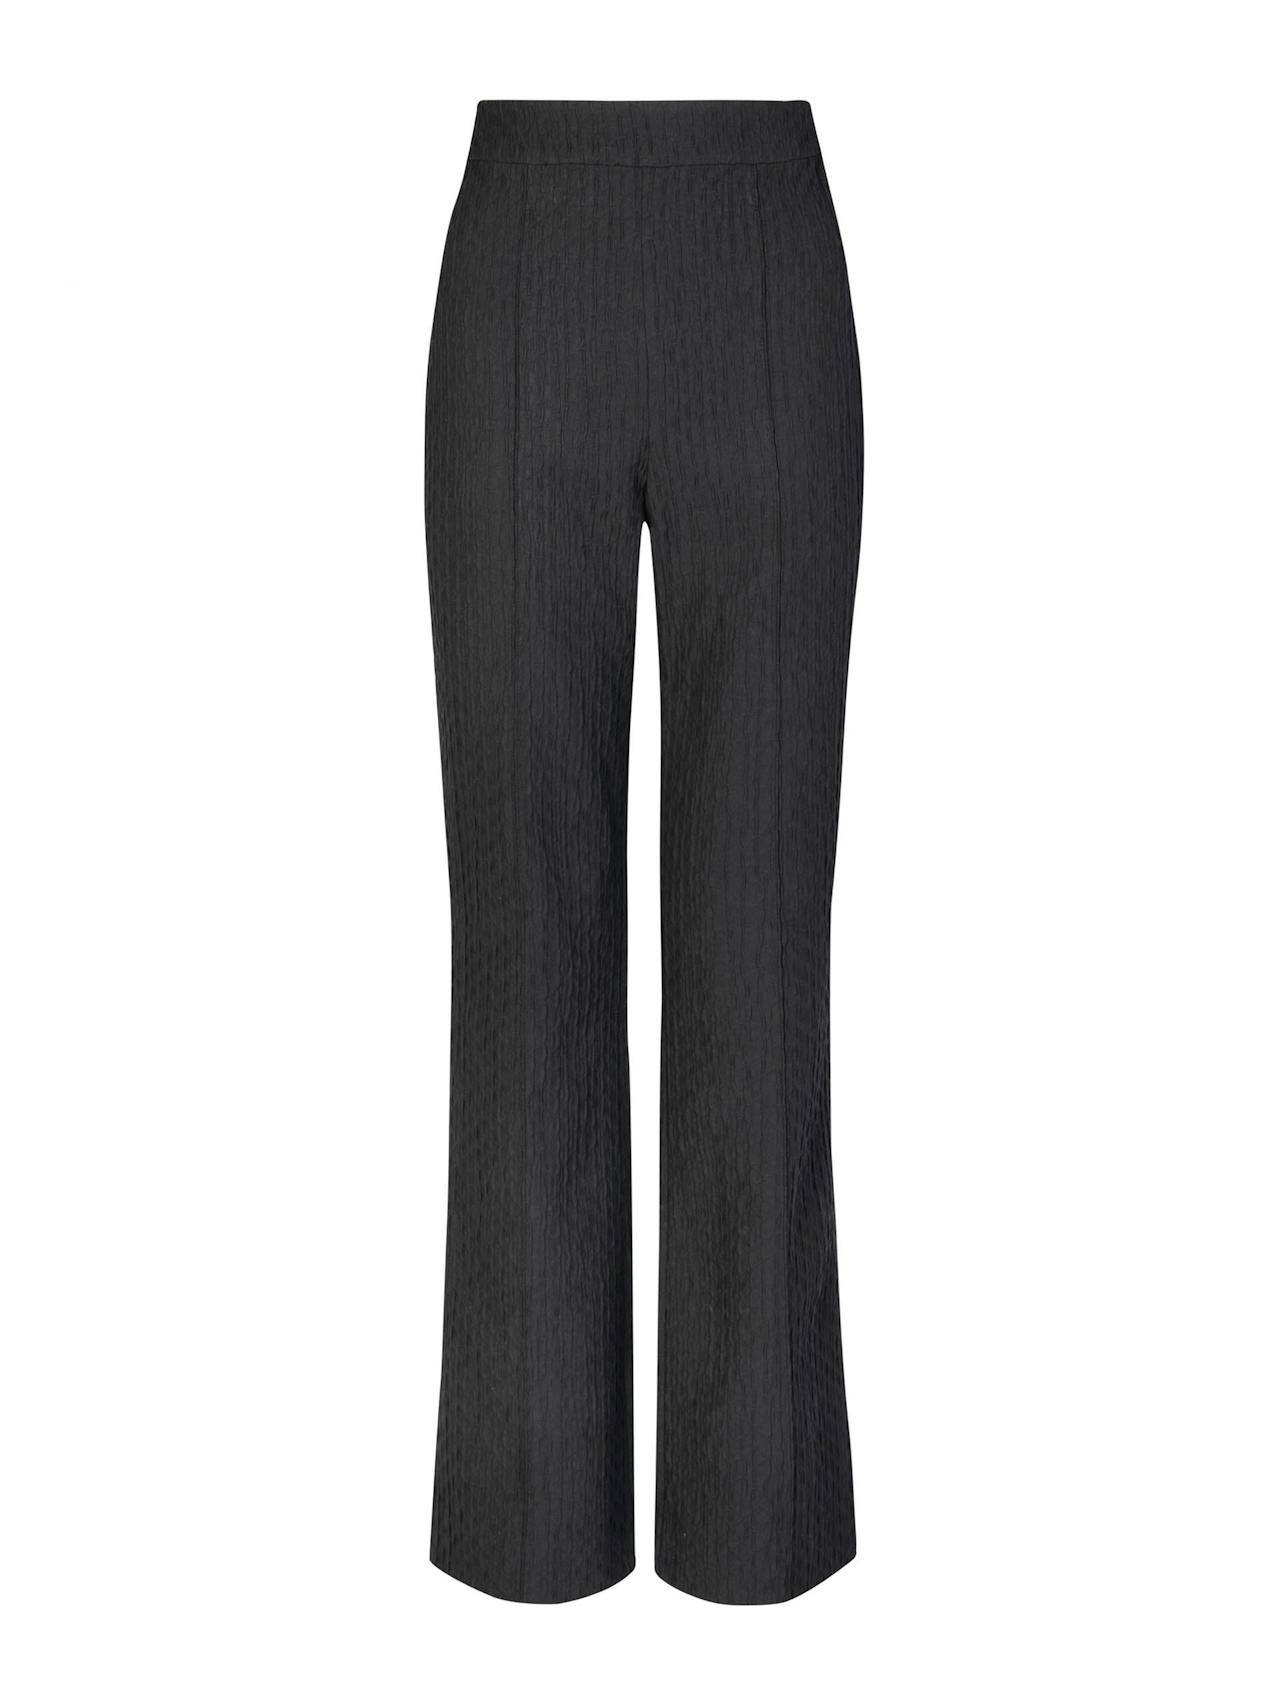 Annabel trousers